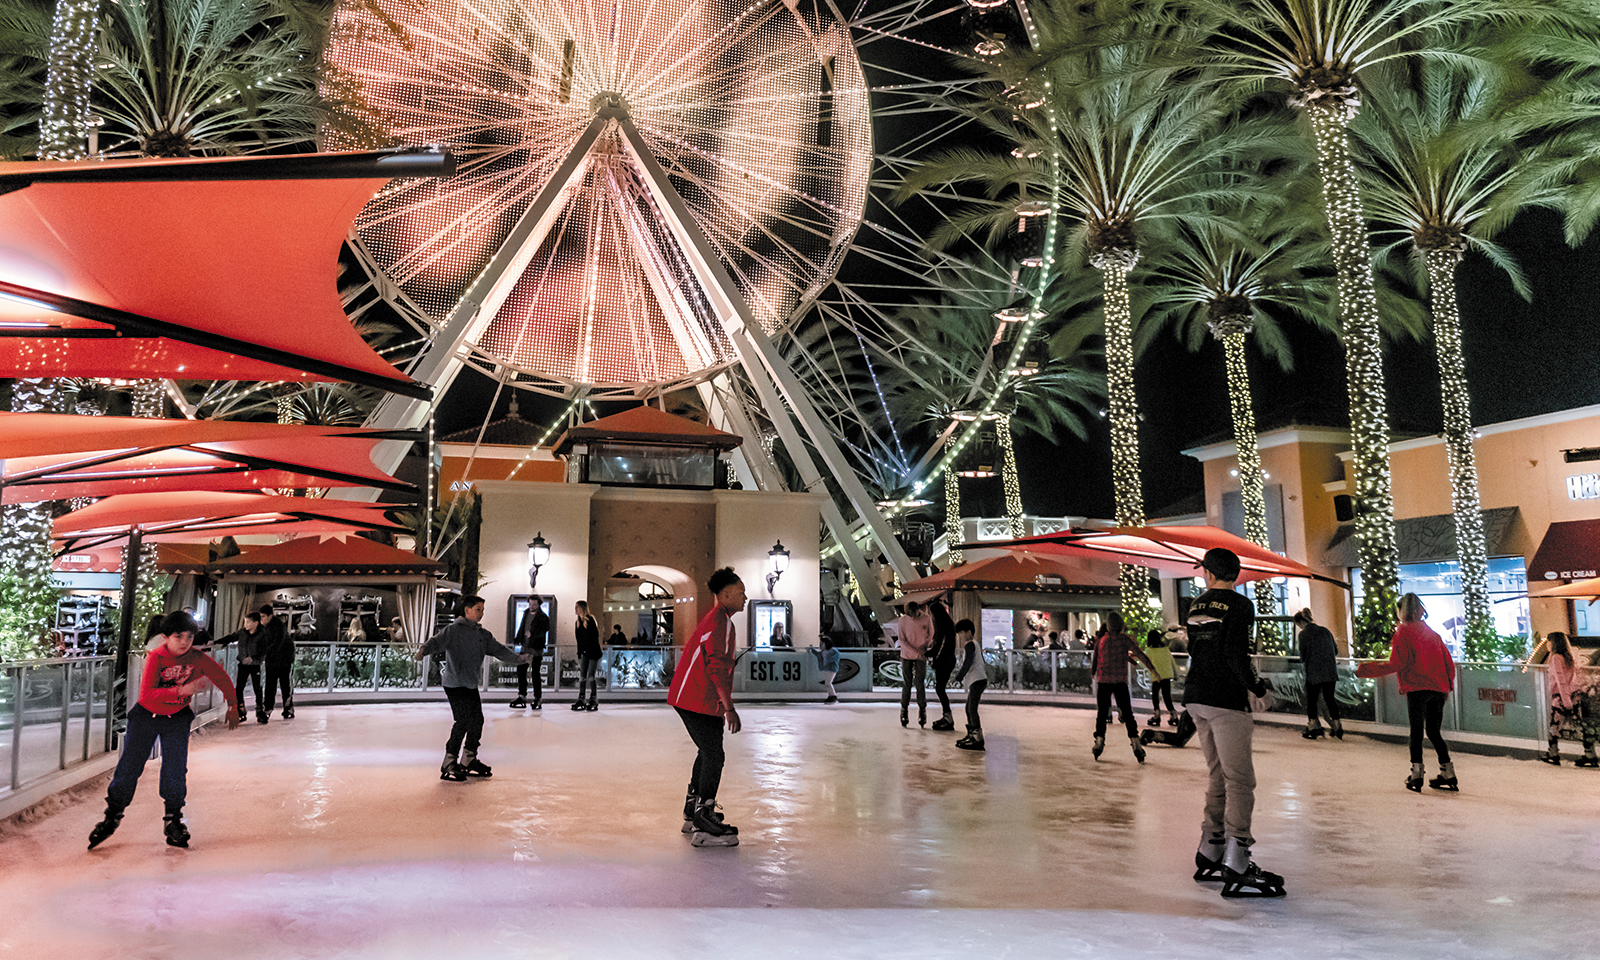 Hit the ice at Spectrum Center